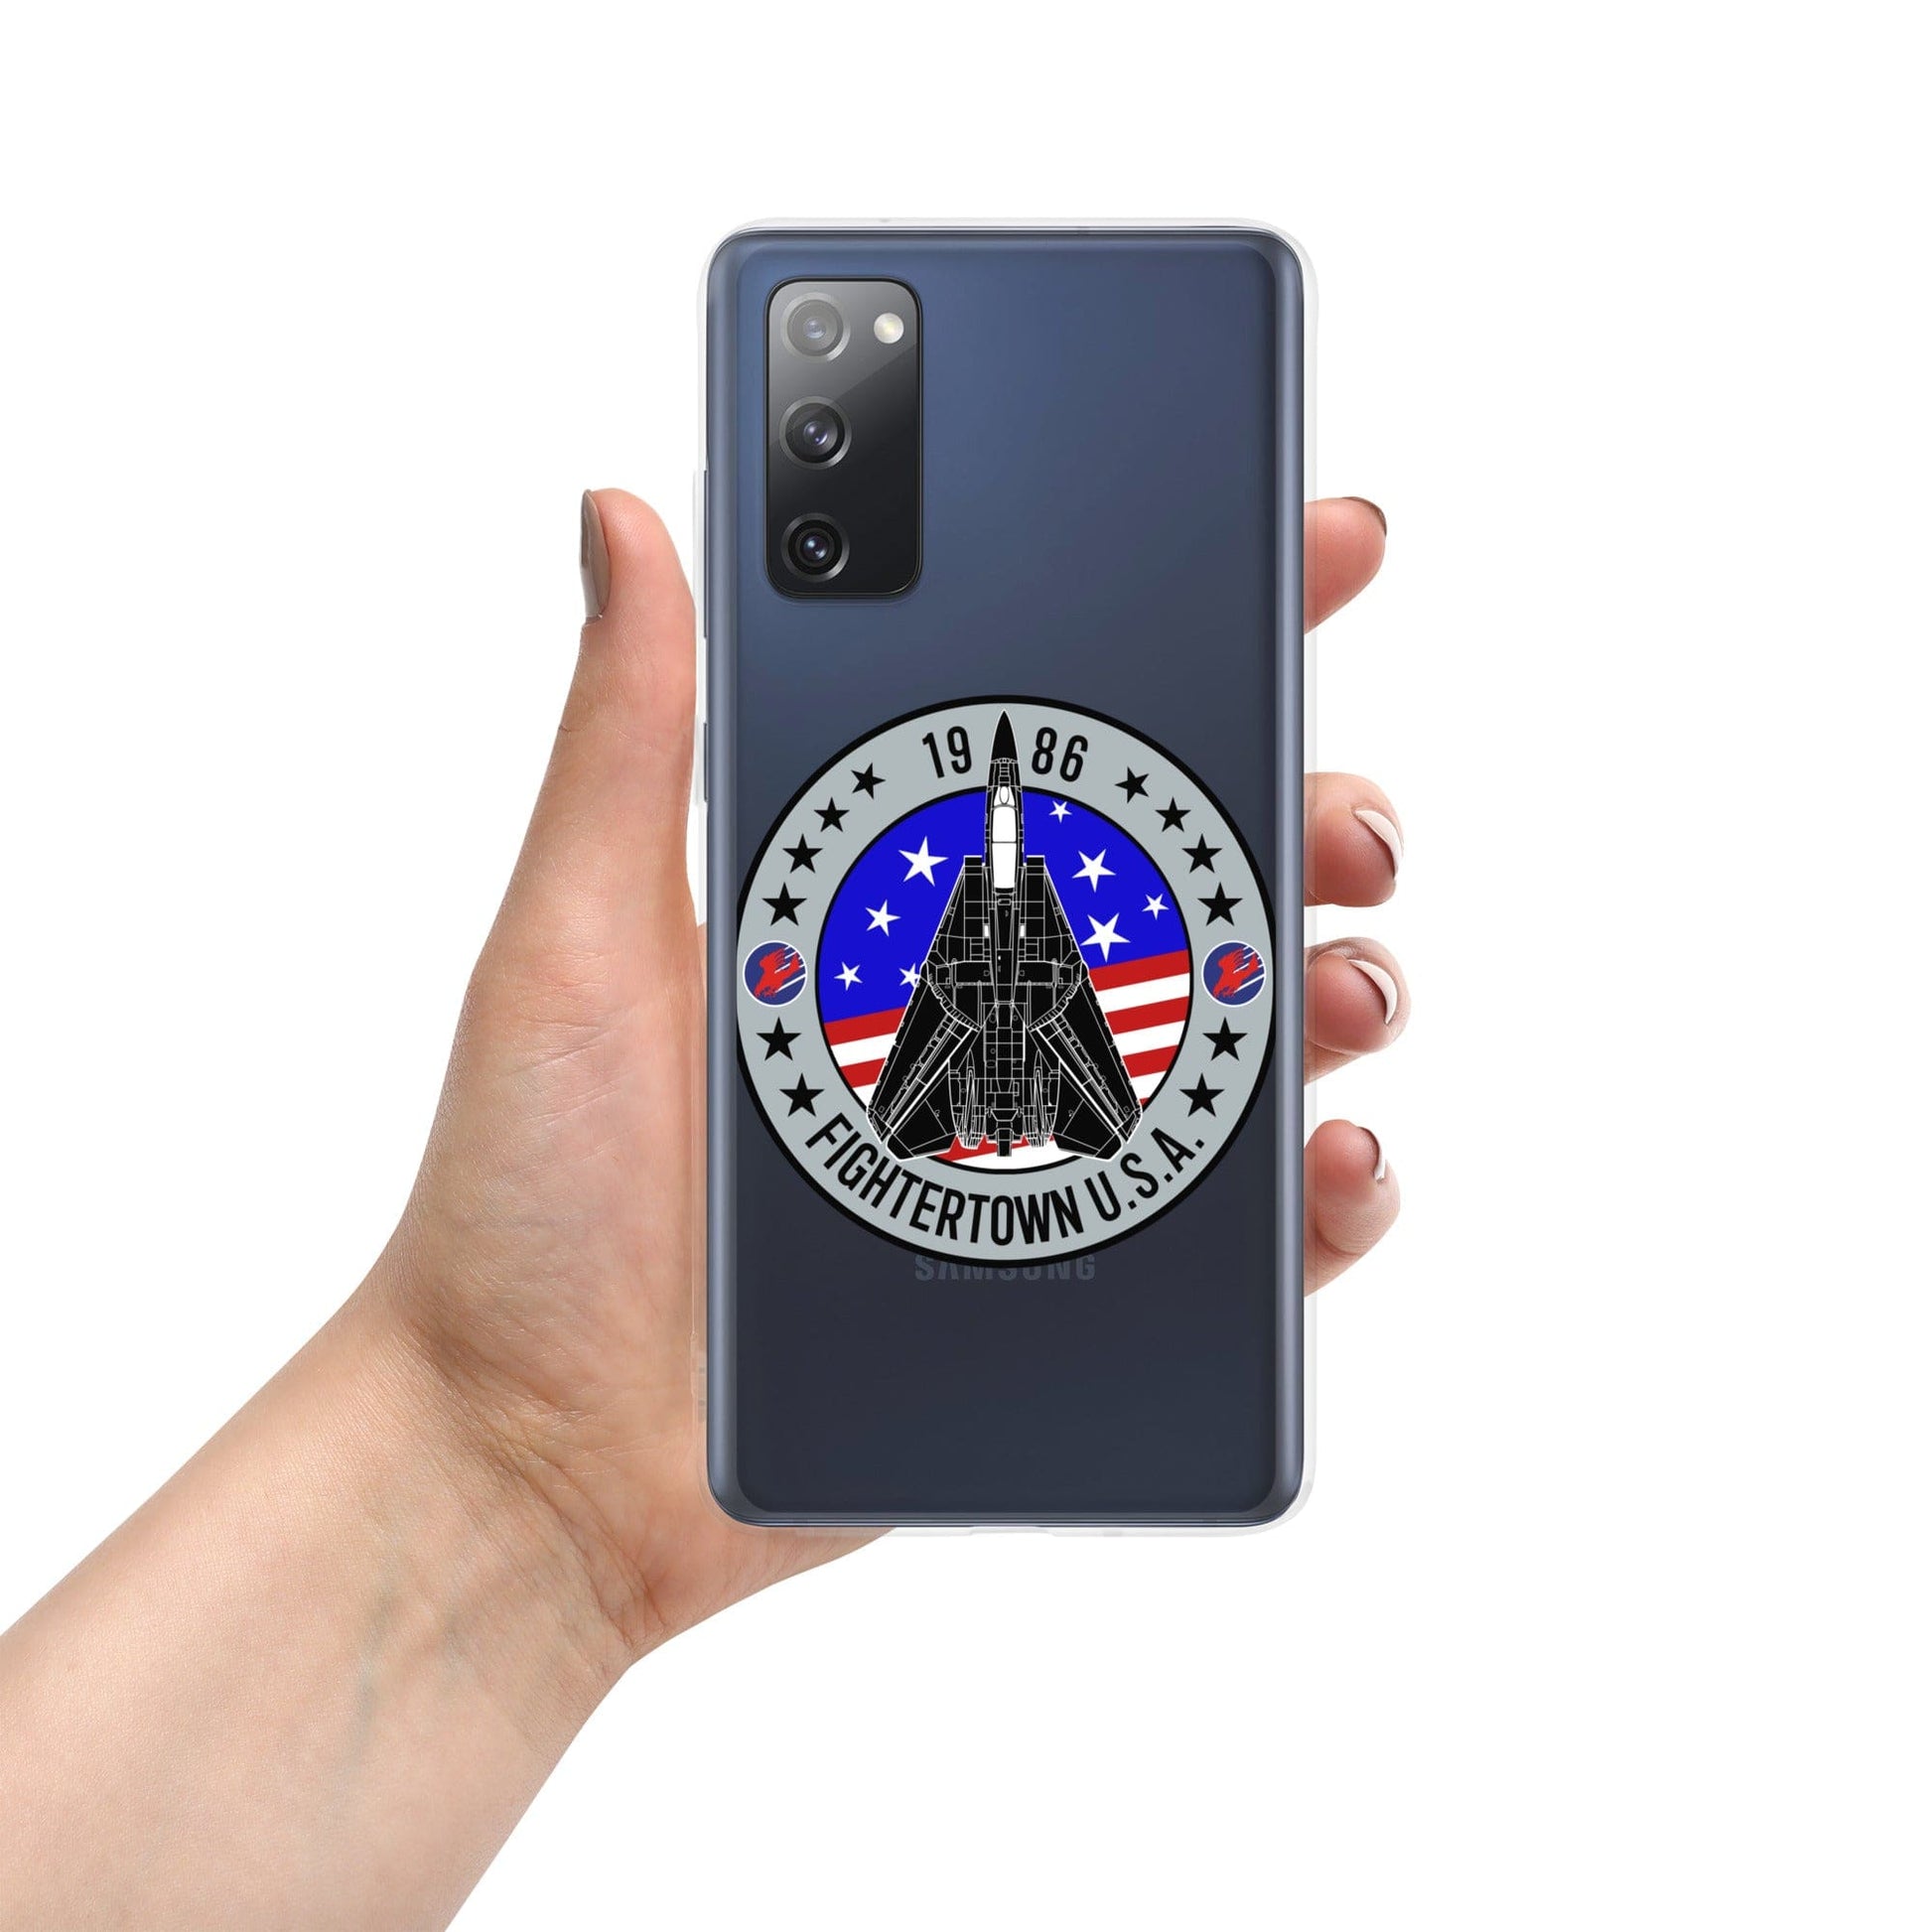 Top Gun Fans Mobile Phone Cases Samsung Galaxy S20 FE F-14 Tomcat Fightertown Clear Samsung Case